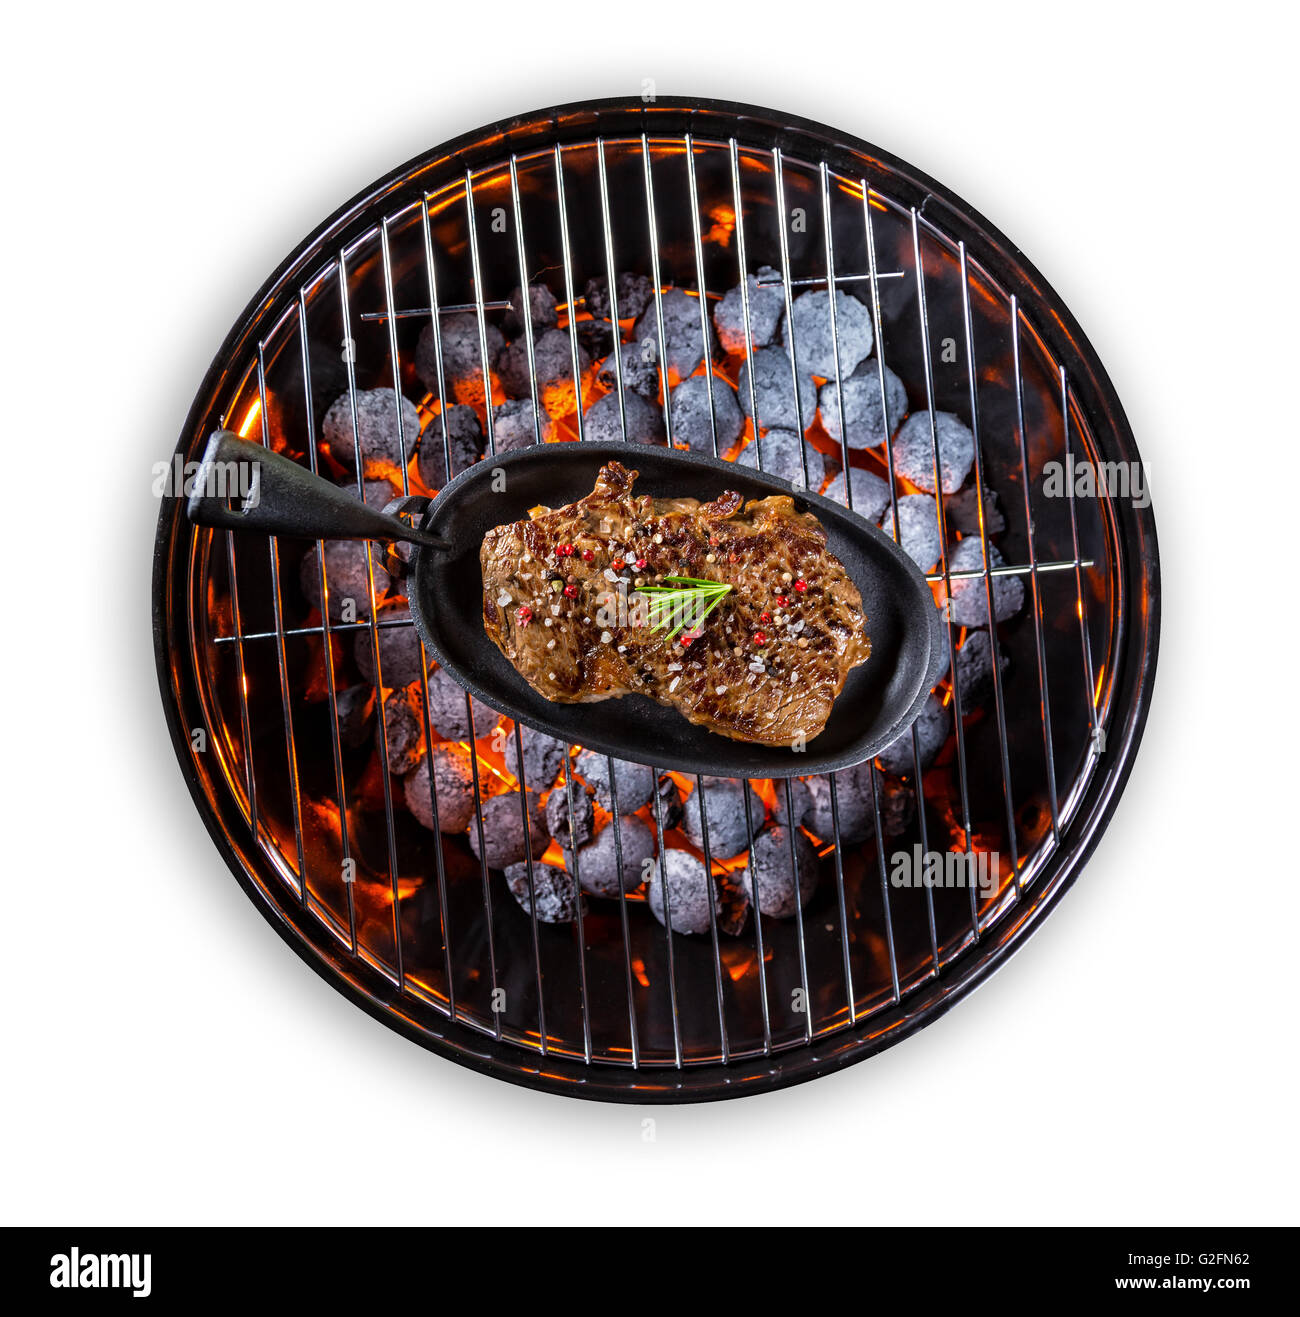 https://c8.alamy.com/comp/G2FN62/beef-steak-in-pan-served-on-grill-isolated-on-white-background-G2FN62.jpg